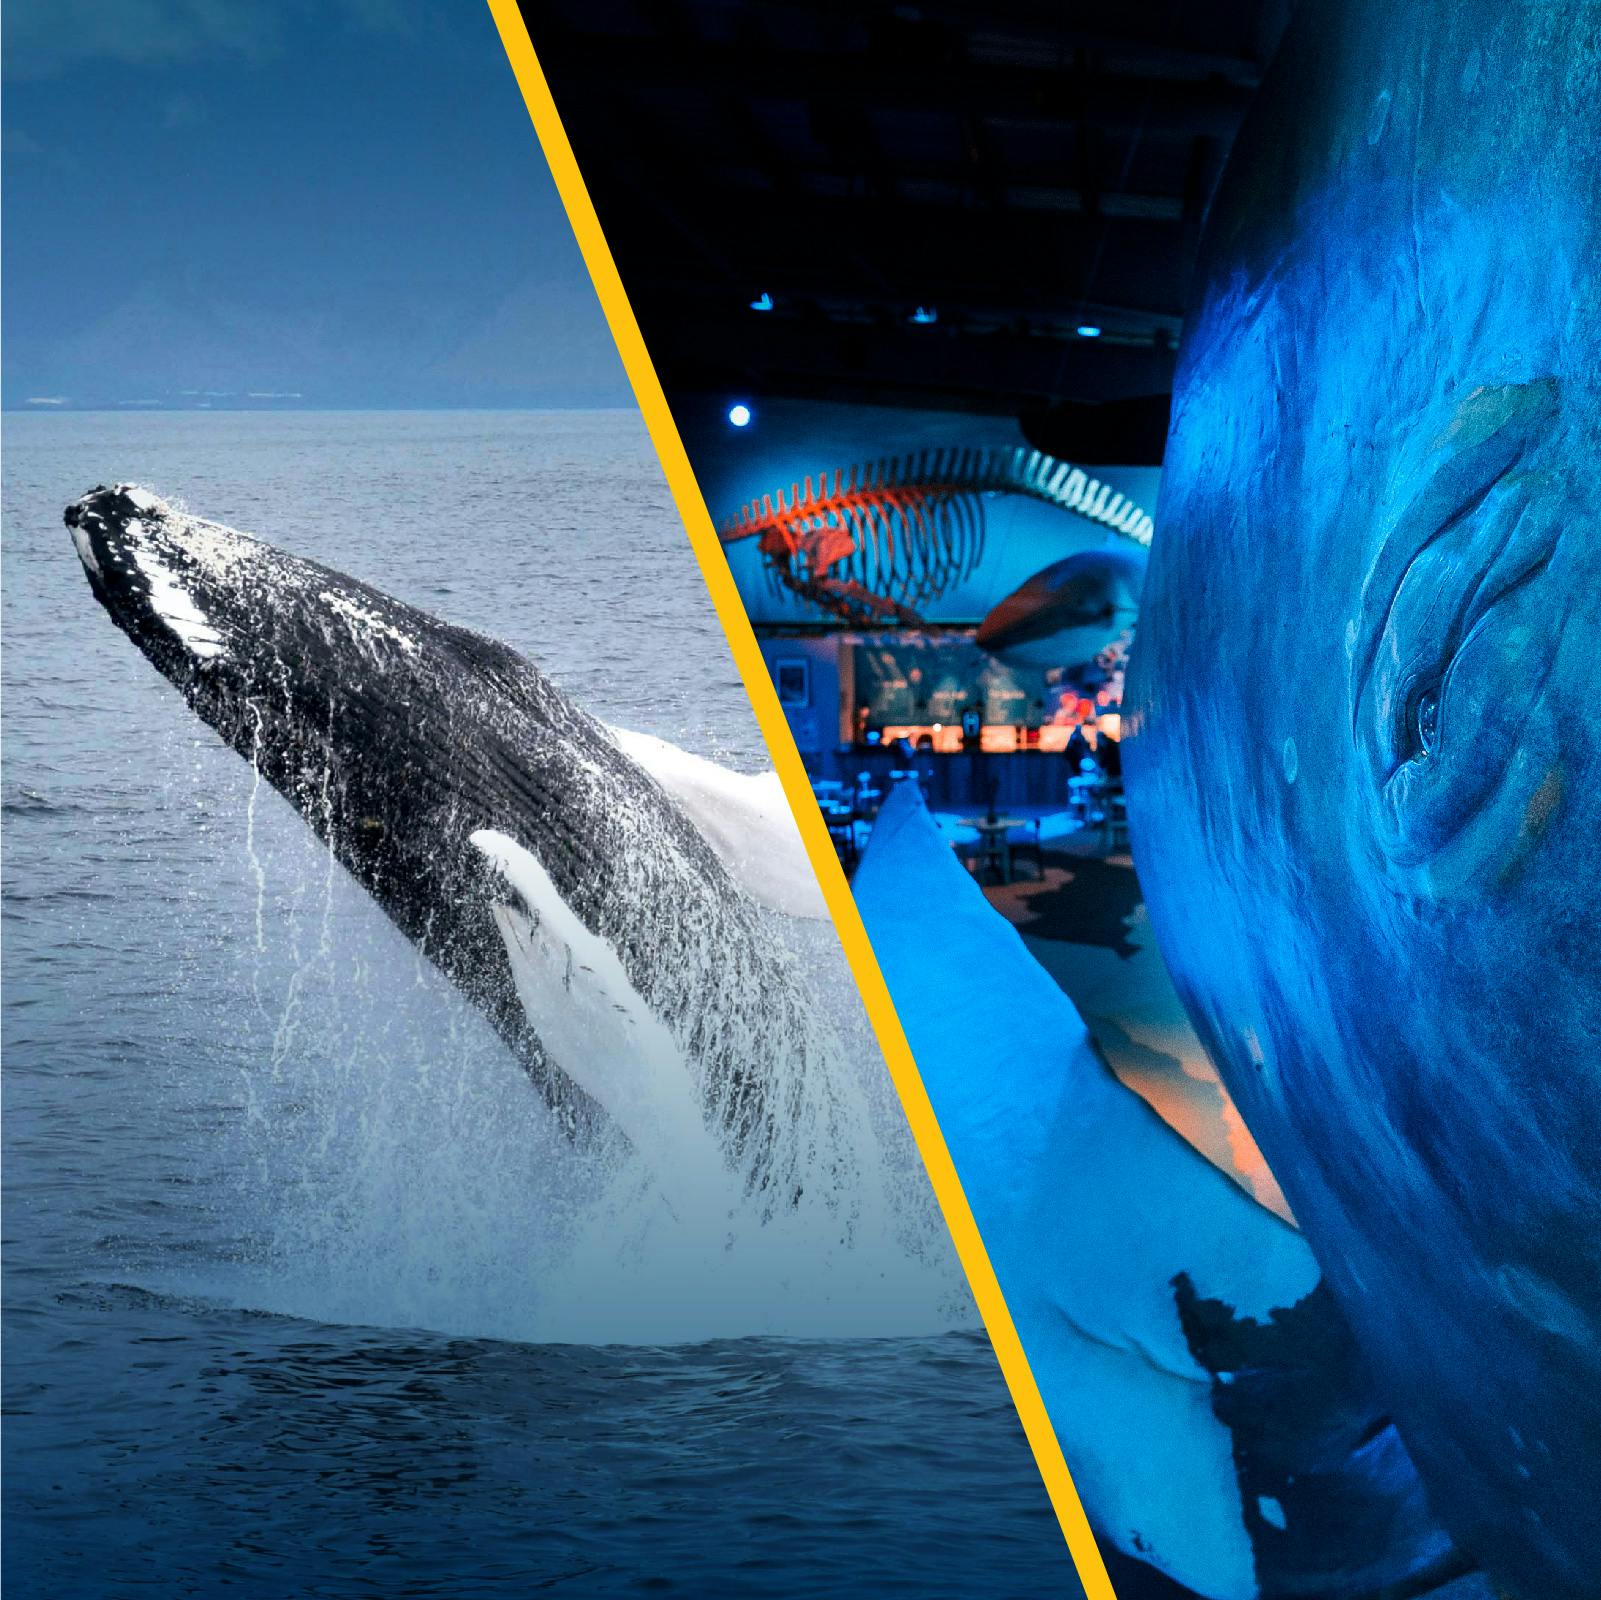 Whale Watching & Whales of Iceland Exhibition